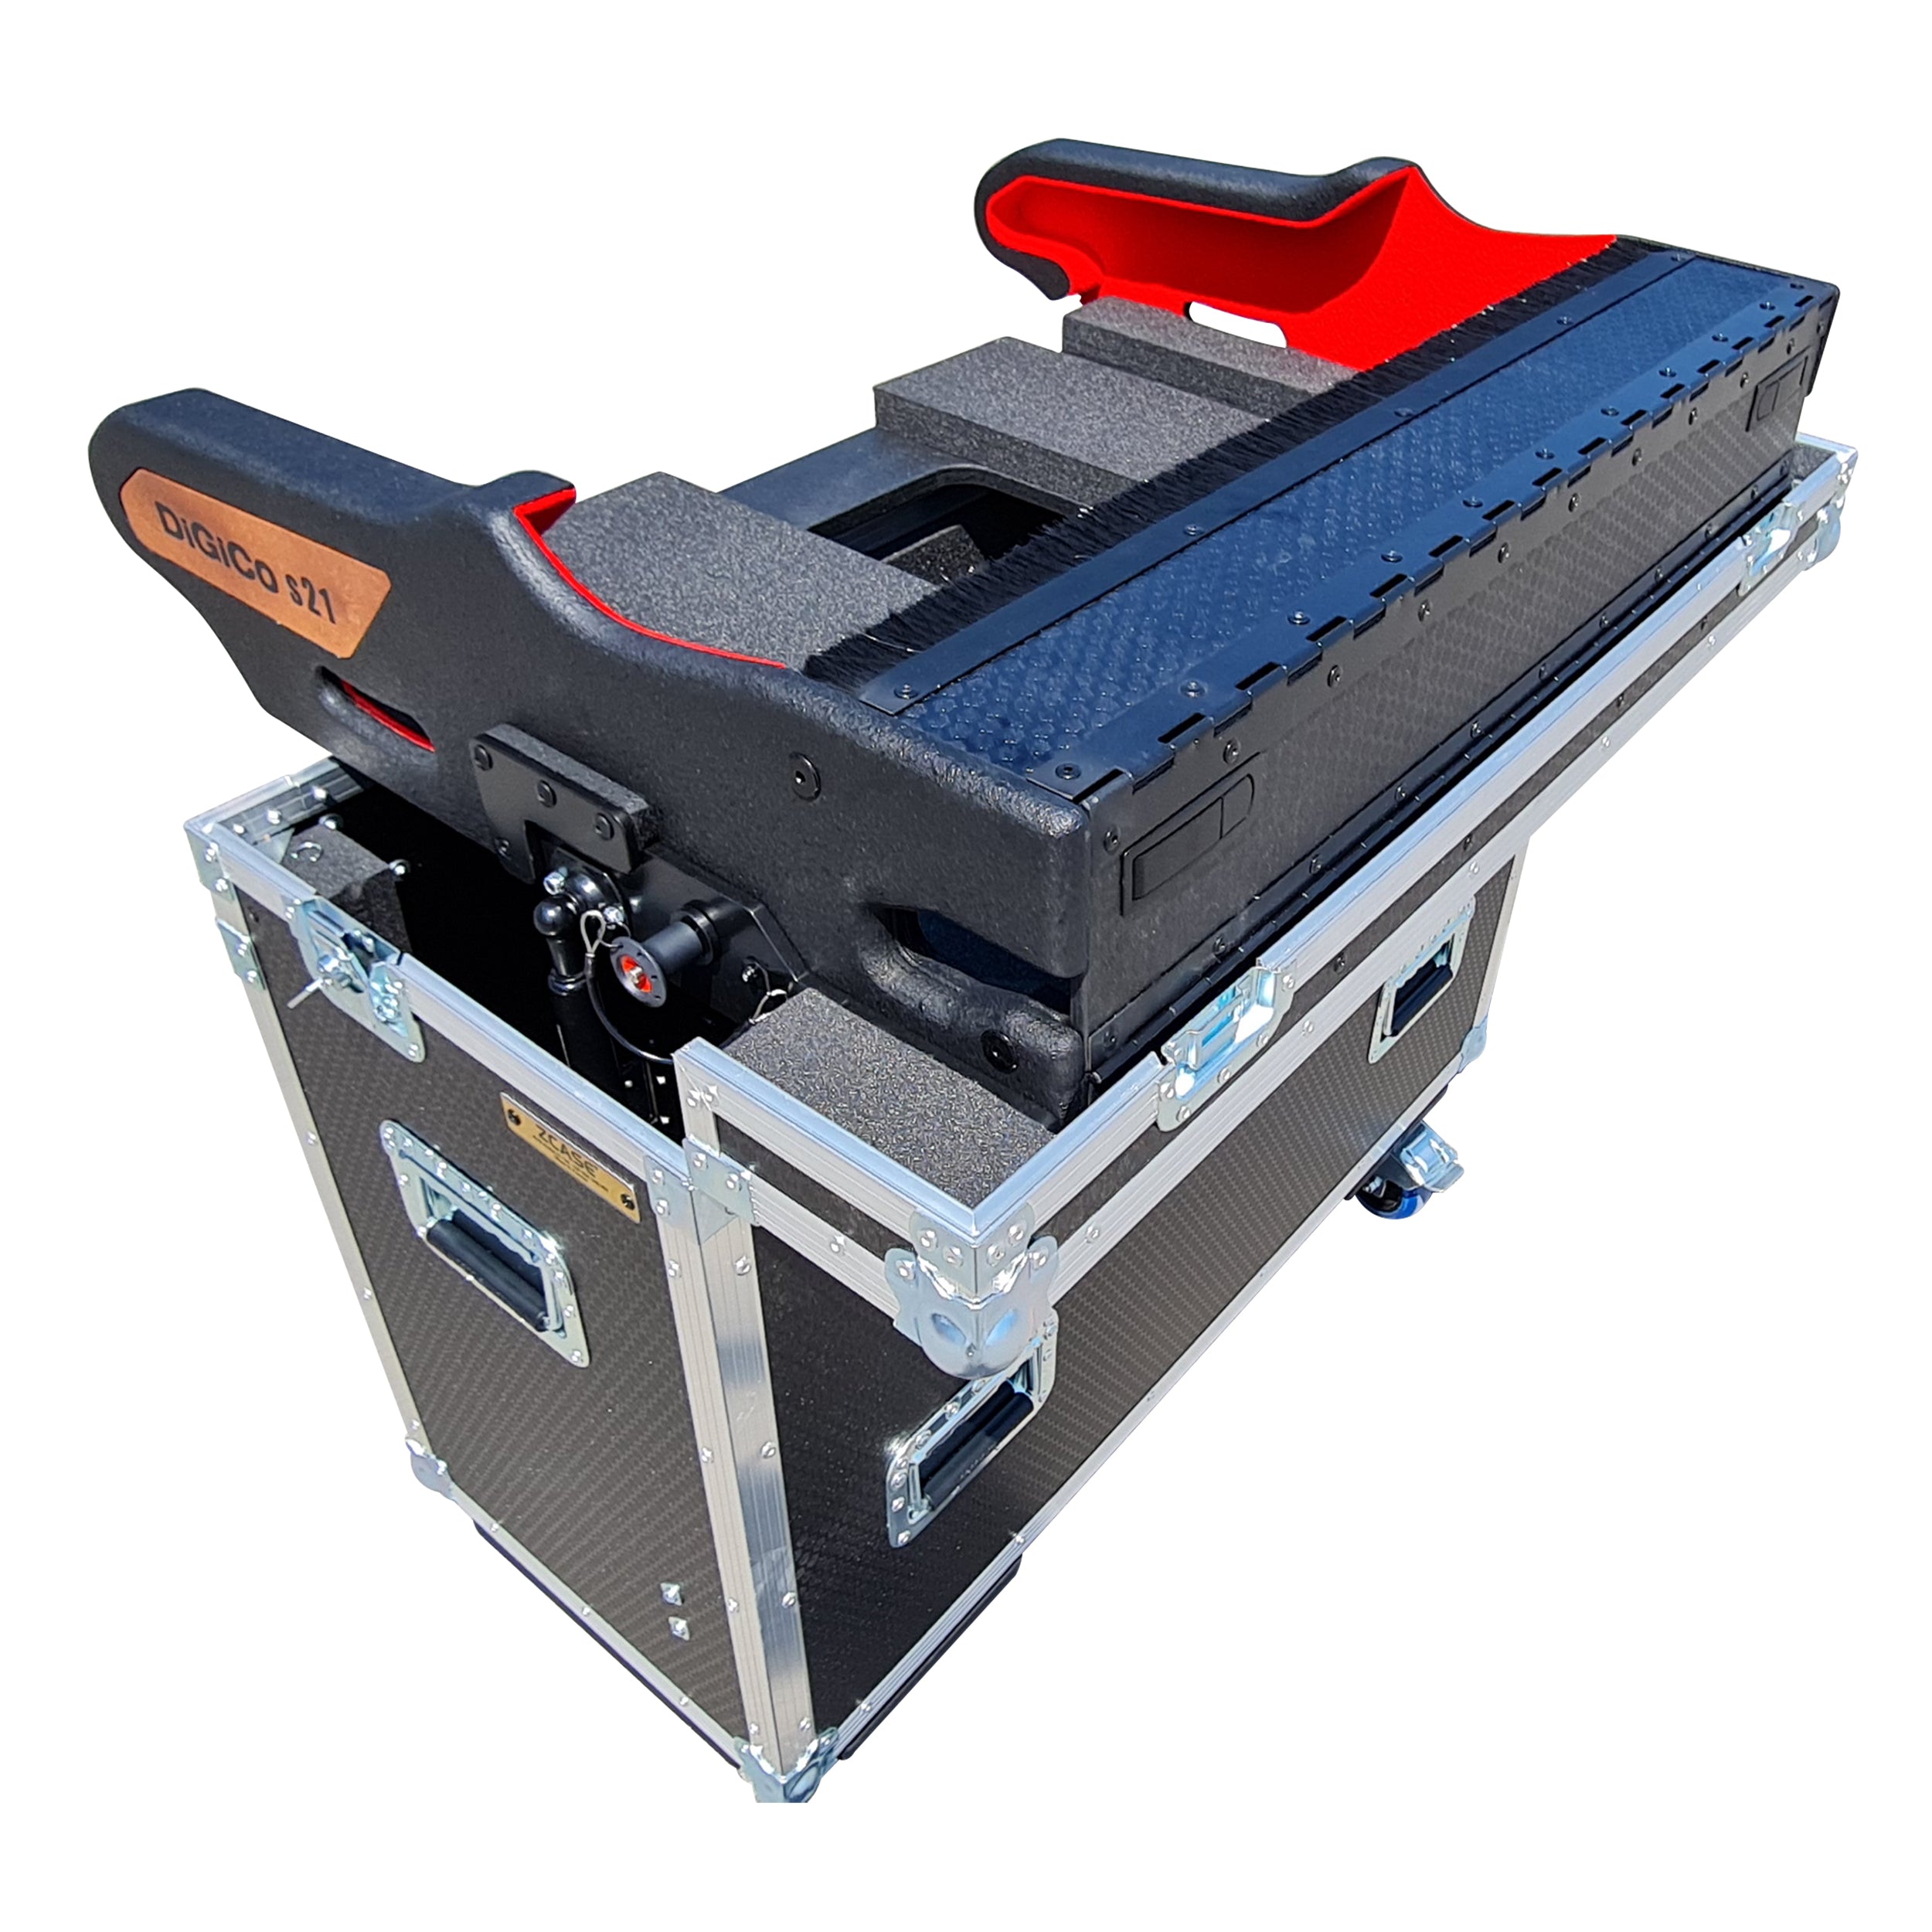 Pro X For DiGiCO S21 Flip-Ready Hydraulic Console Easy Retracting Detachable Lifting Console Flight Case with wheels by ZCASE XZF-DIGS21D